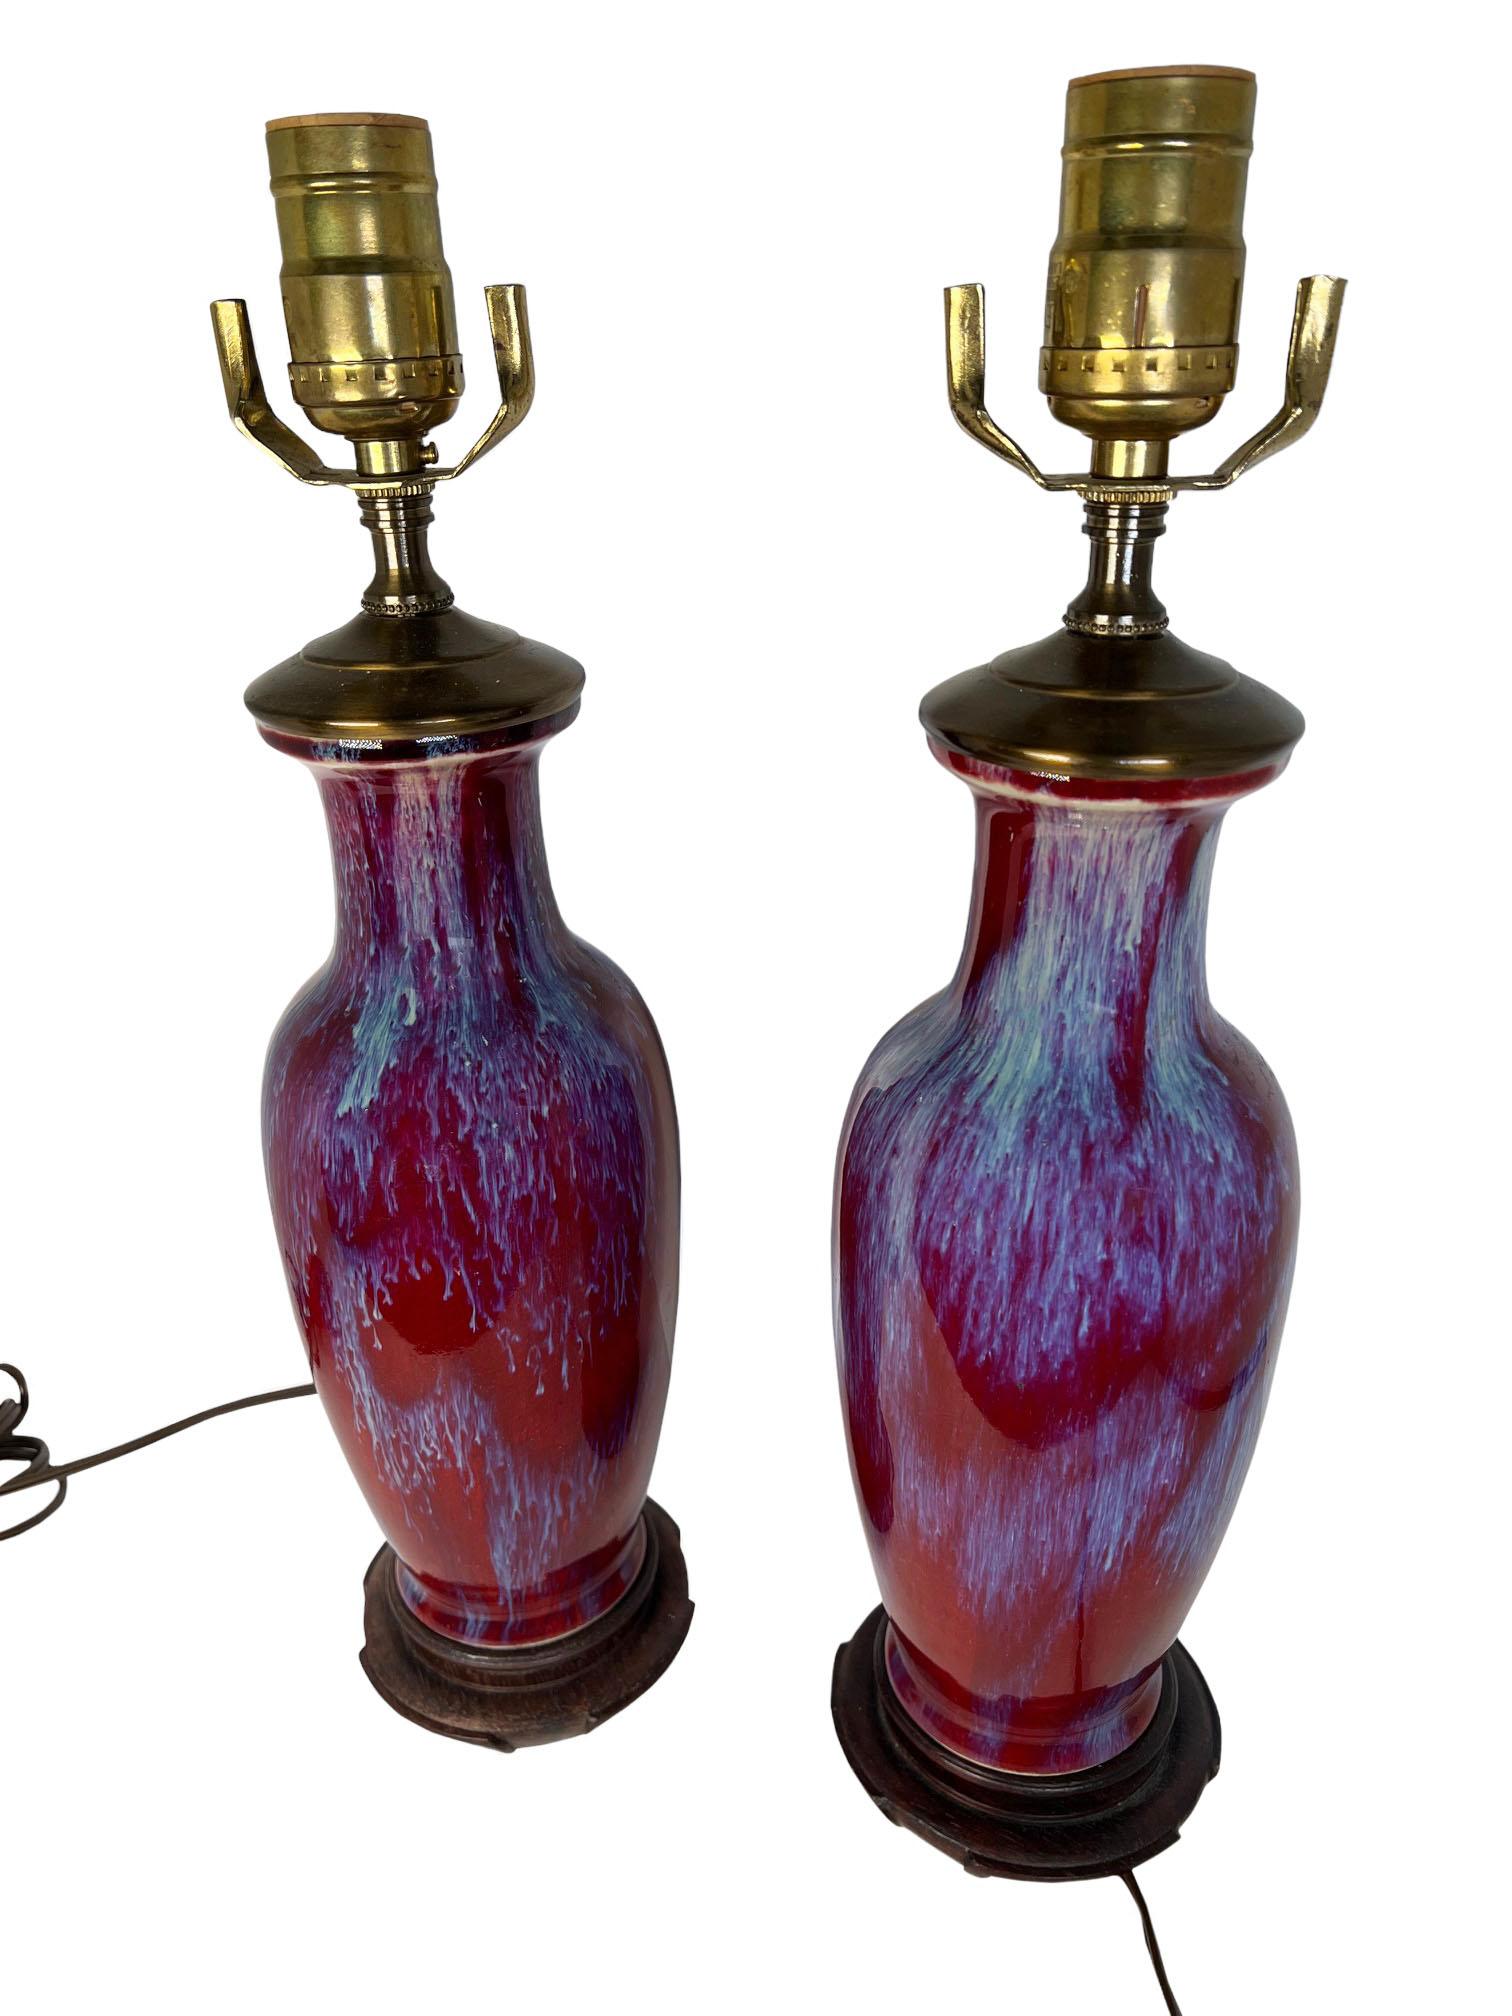 A pair of sung de boeuf vases converted into lamps with wood bases. 20th century China.